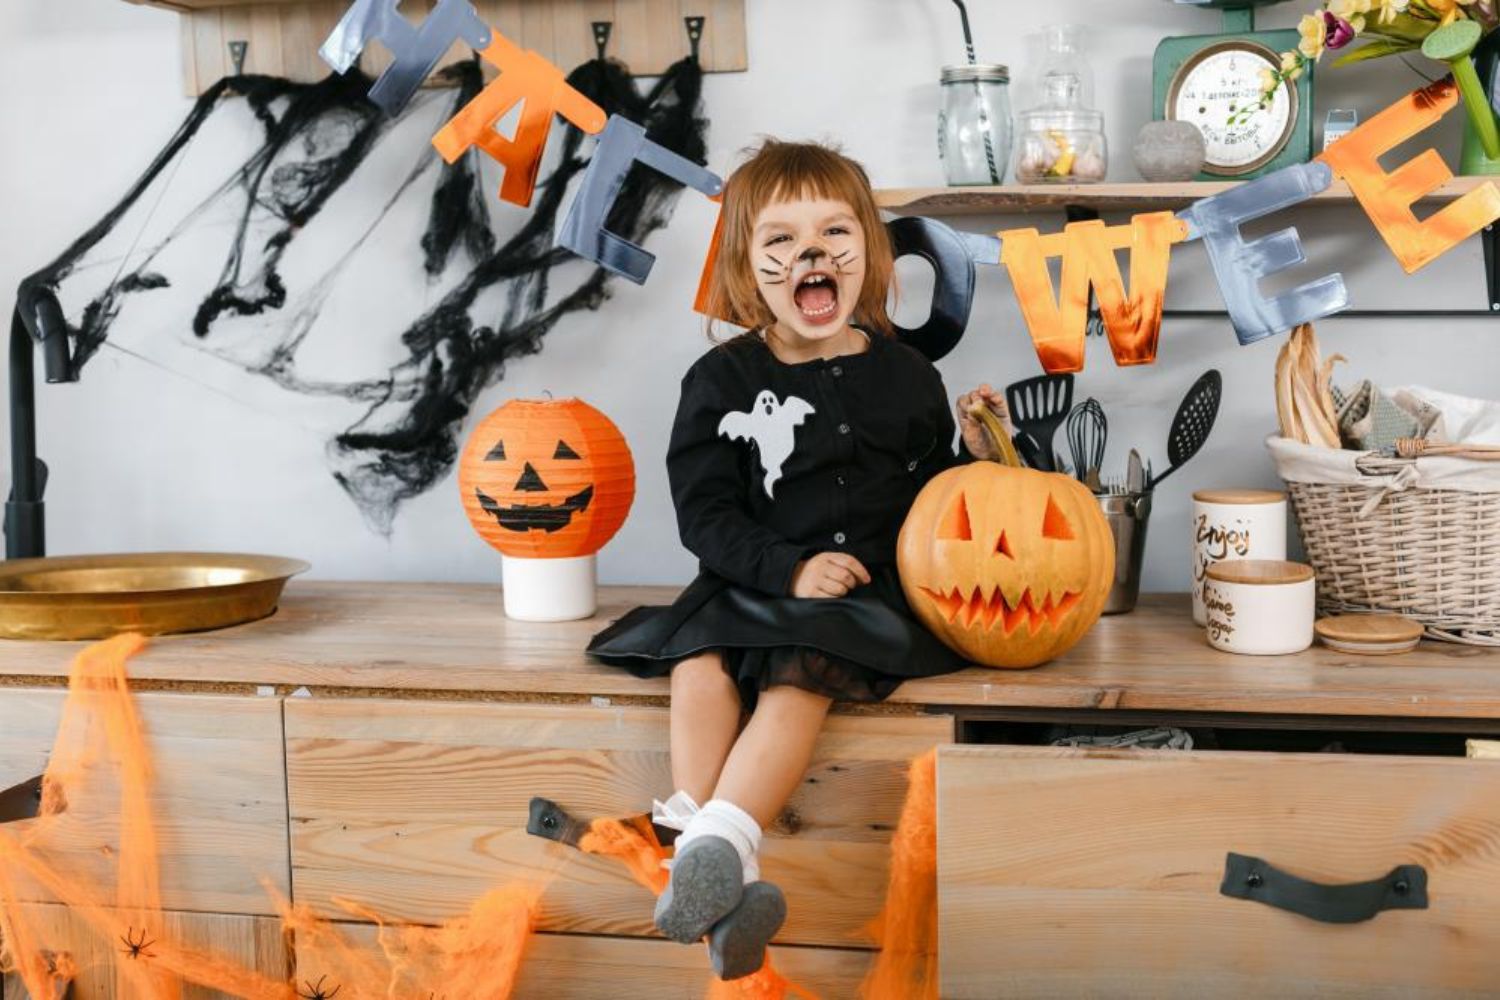 19 Creative Halloween Photoshoot Ideas You Can Try at Home